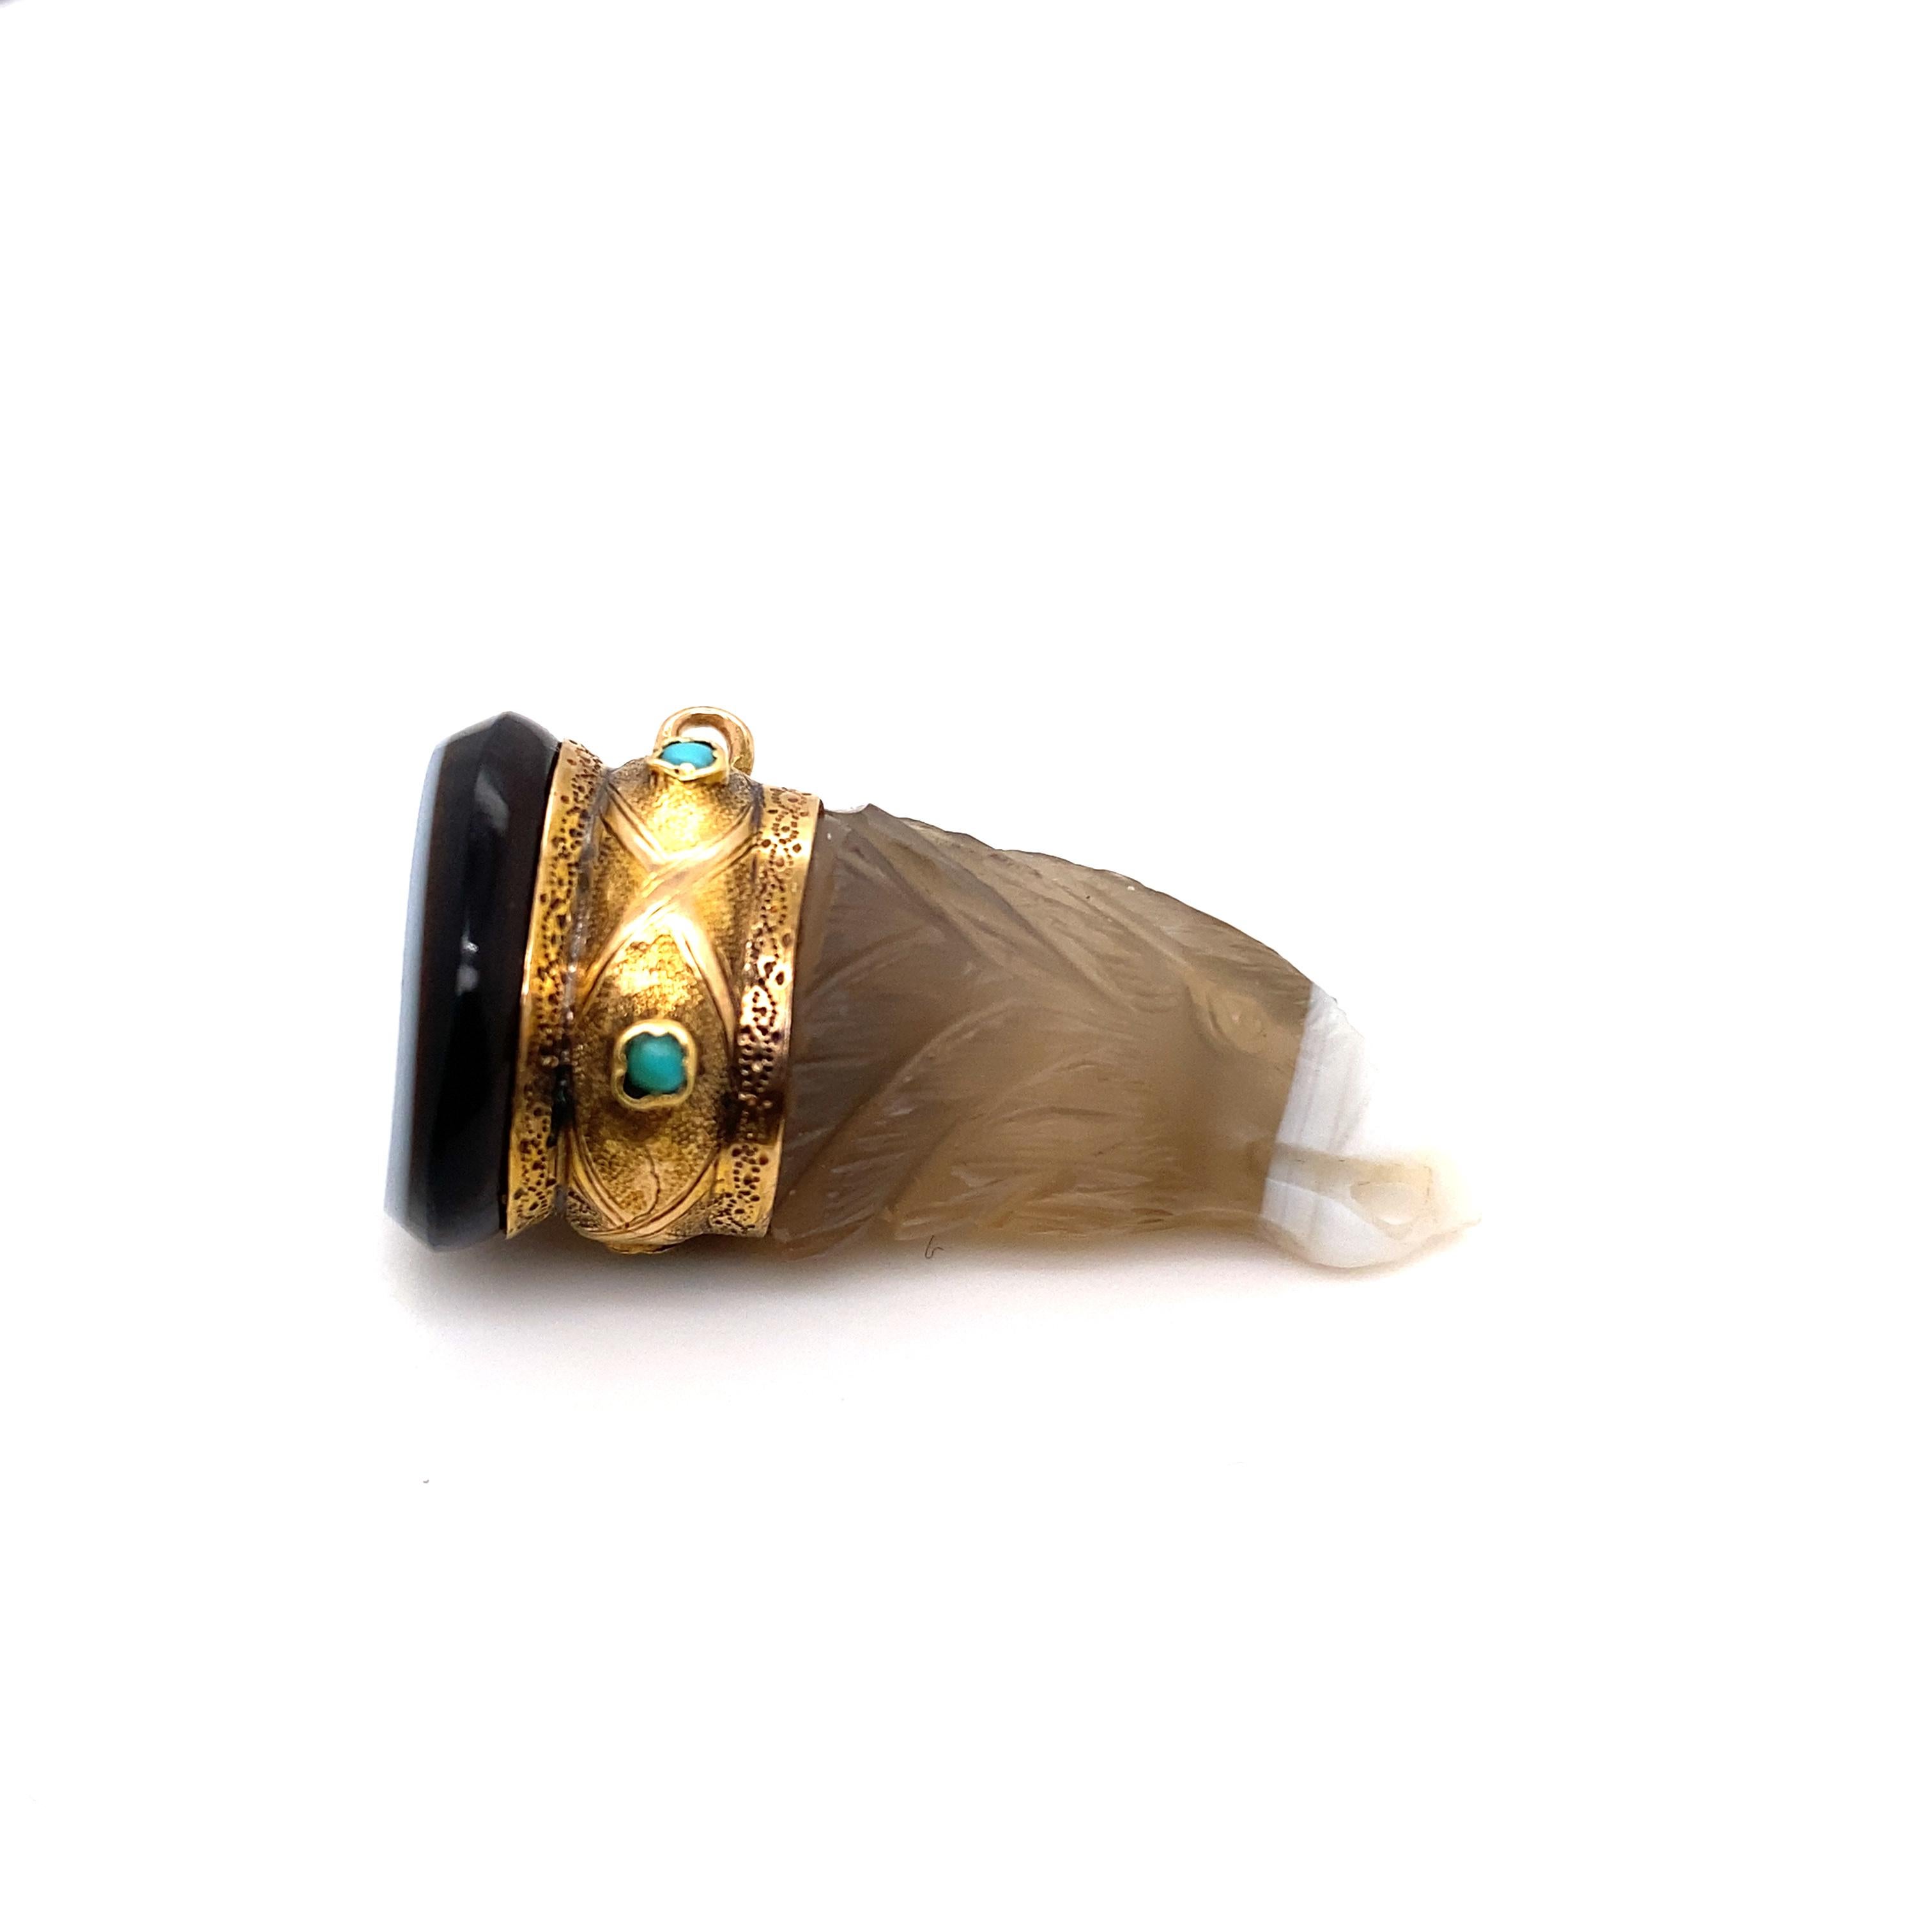 A vintage agate 18 karat yellow gold eagle fob, circa 1900.

This rare and unusual fob is realistically modelled as an eagle carved from one piece of banded agate.
The white section of banded agate is the beak of the bird of prey.

The eagle